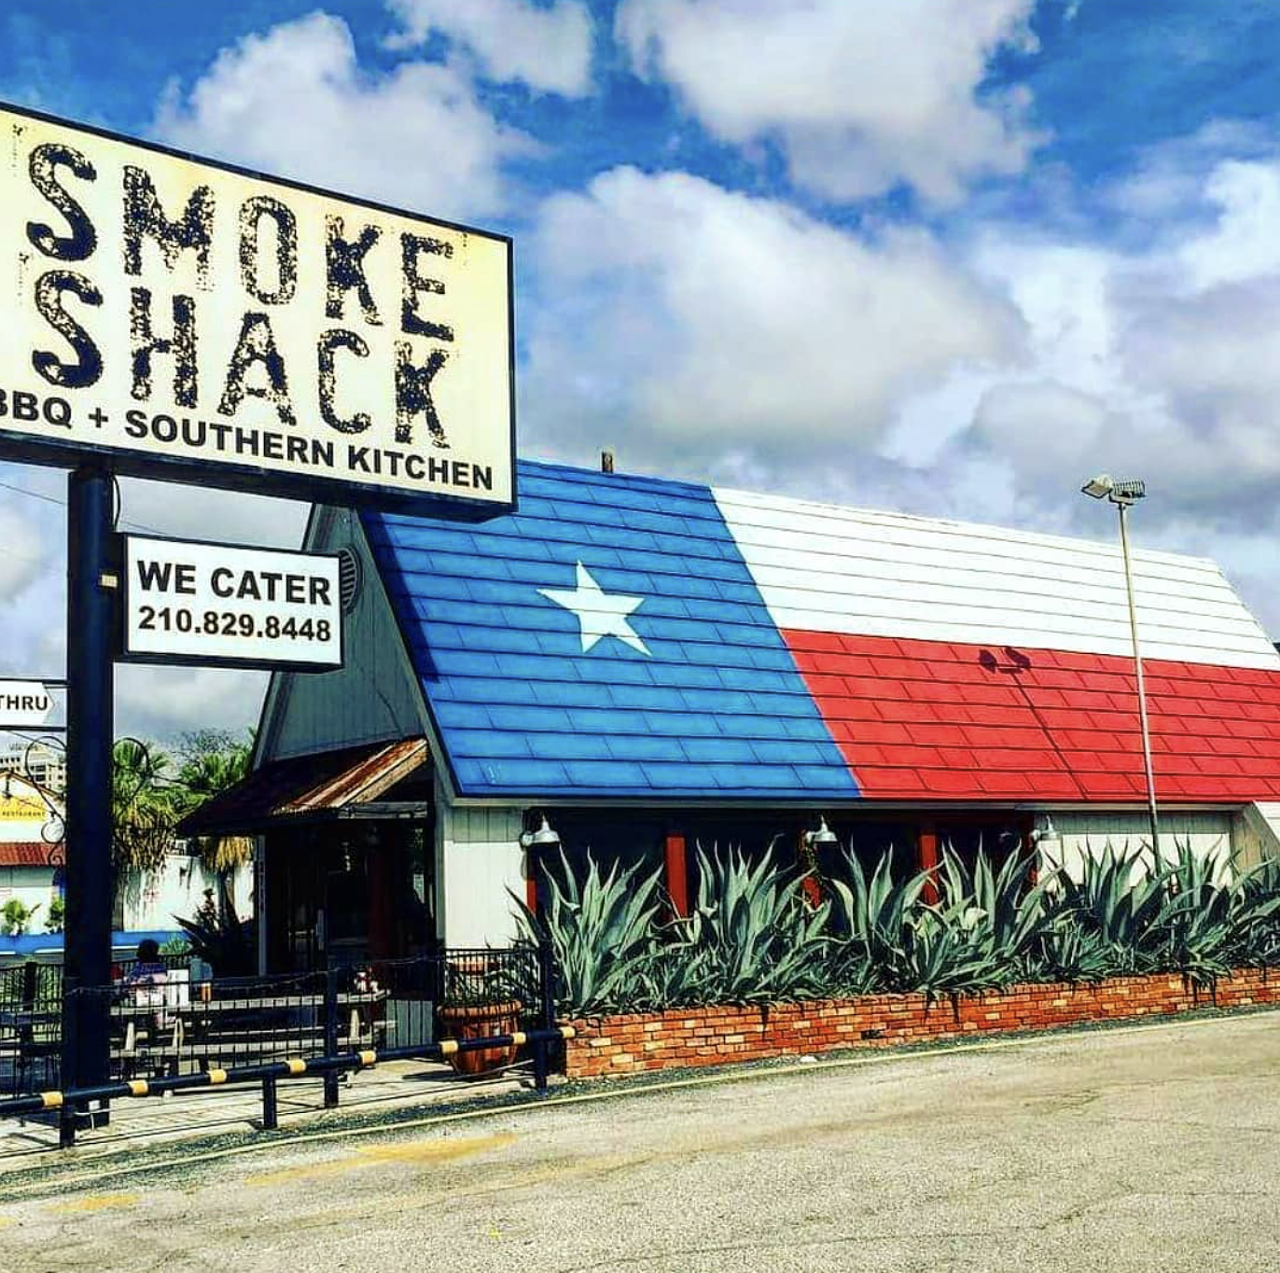 Smoke Shack
3714 Broadway, (210) 829-8448, toasttab.com
Smoke Shack’s family meal includes a 12-14 pound turkey accompanied by your choice of three side items. The $80 meal can be picked up hot, carved and ready to serve for an additional $20. 
Photo via Instagram / smokeshack